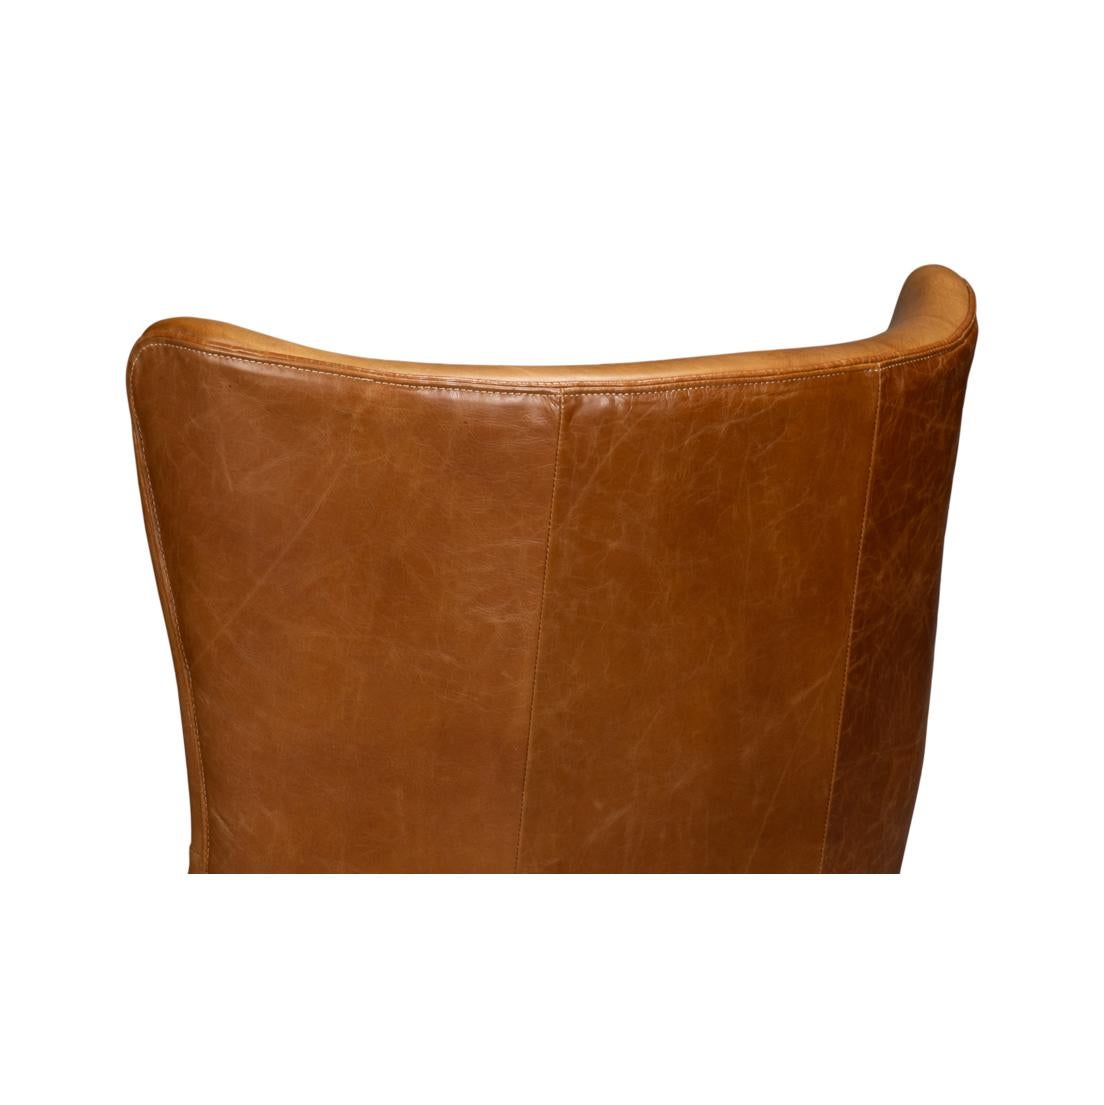 Contemporary Retro Caramel Leather Wingback Chair For Sale